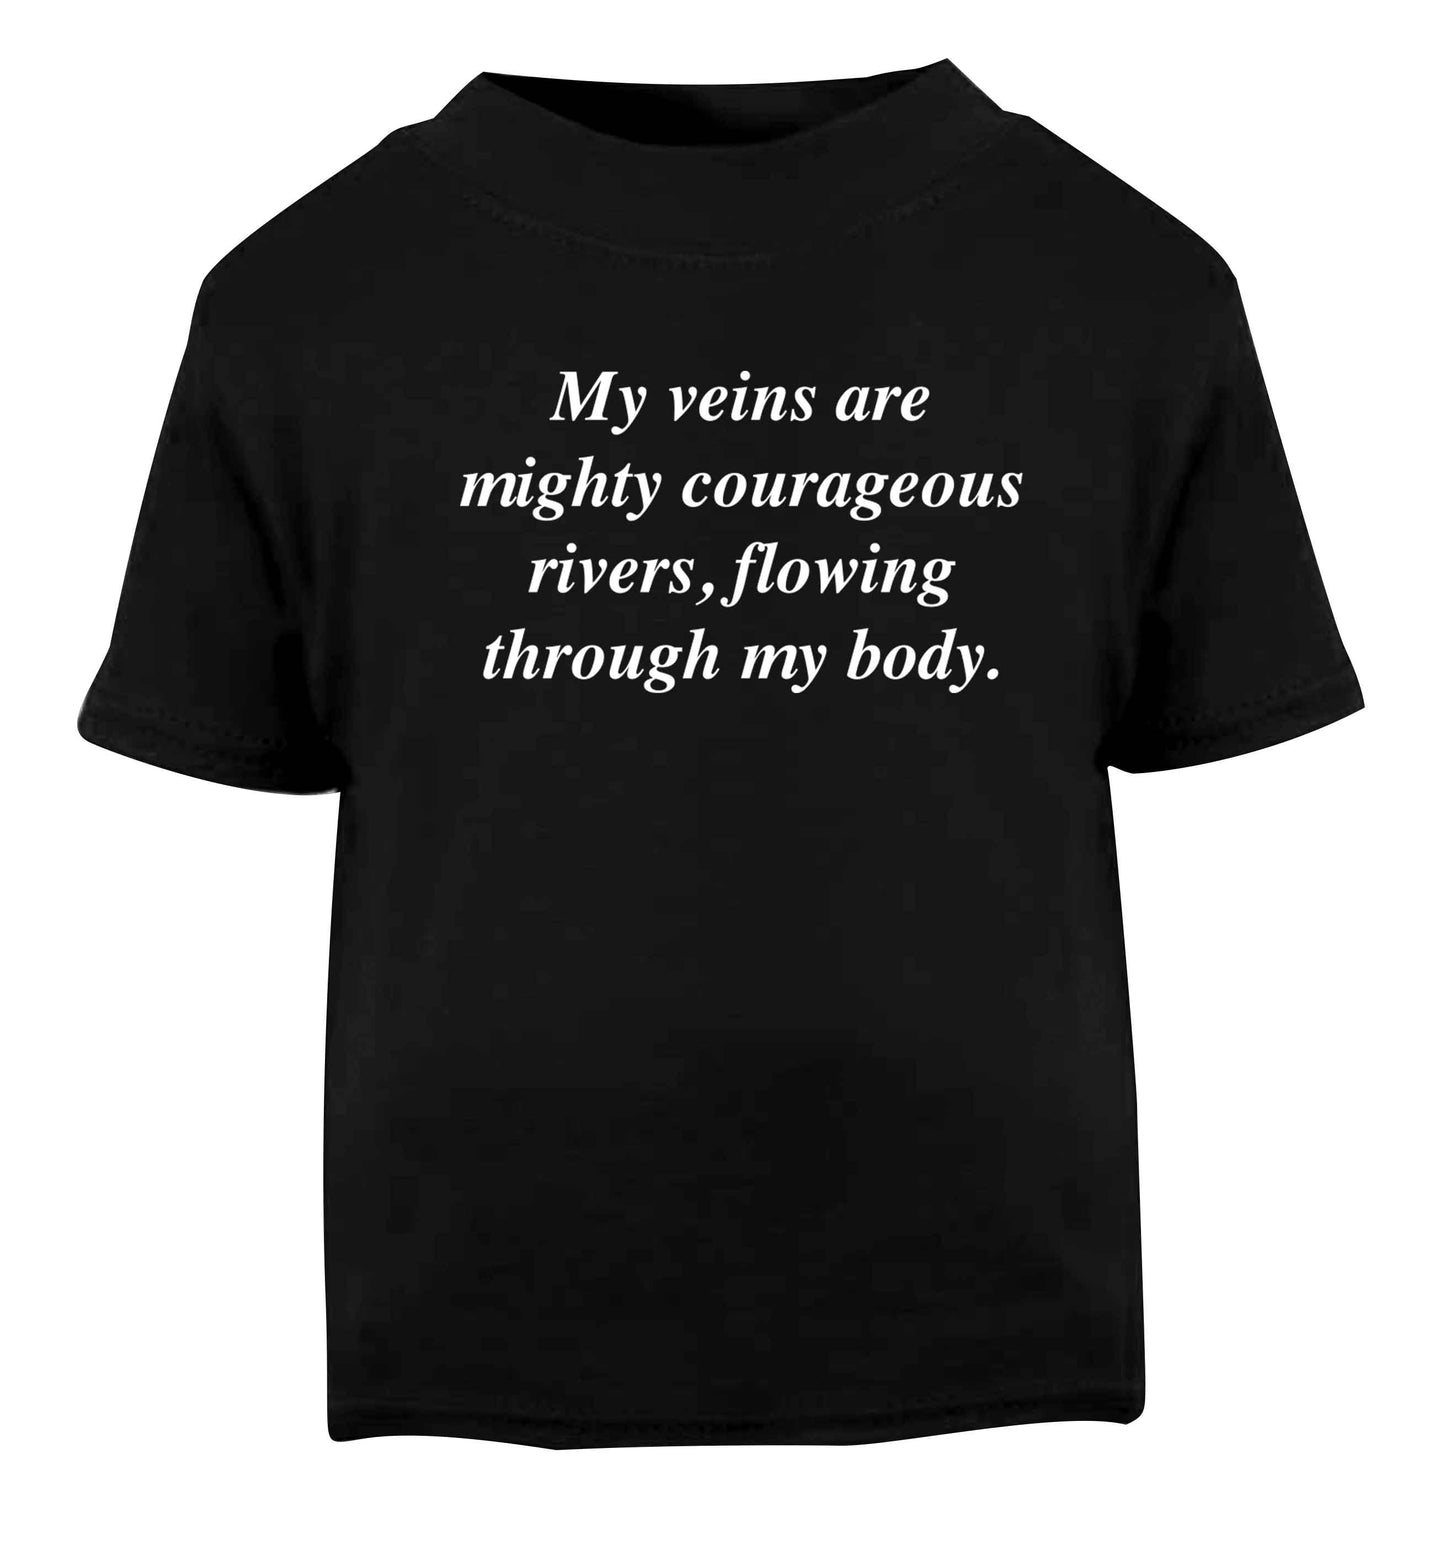 My veins are mighty courageous rivers, flowing through my body Black baby toddler Tshirt 2 years